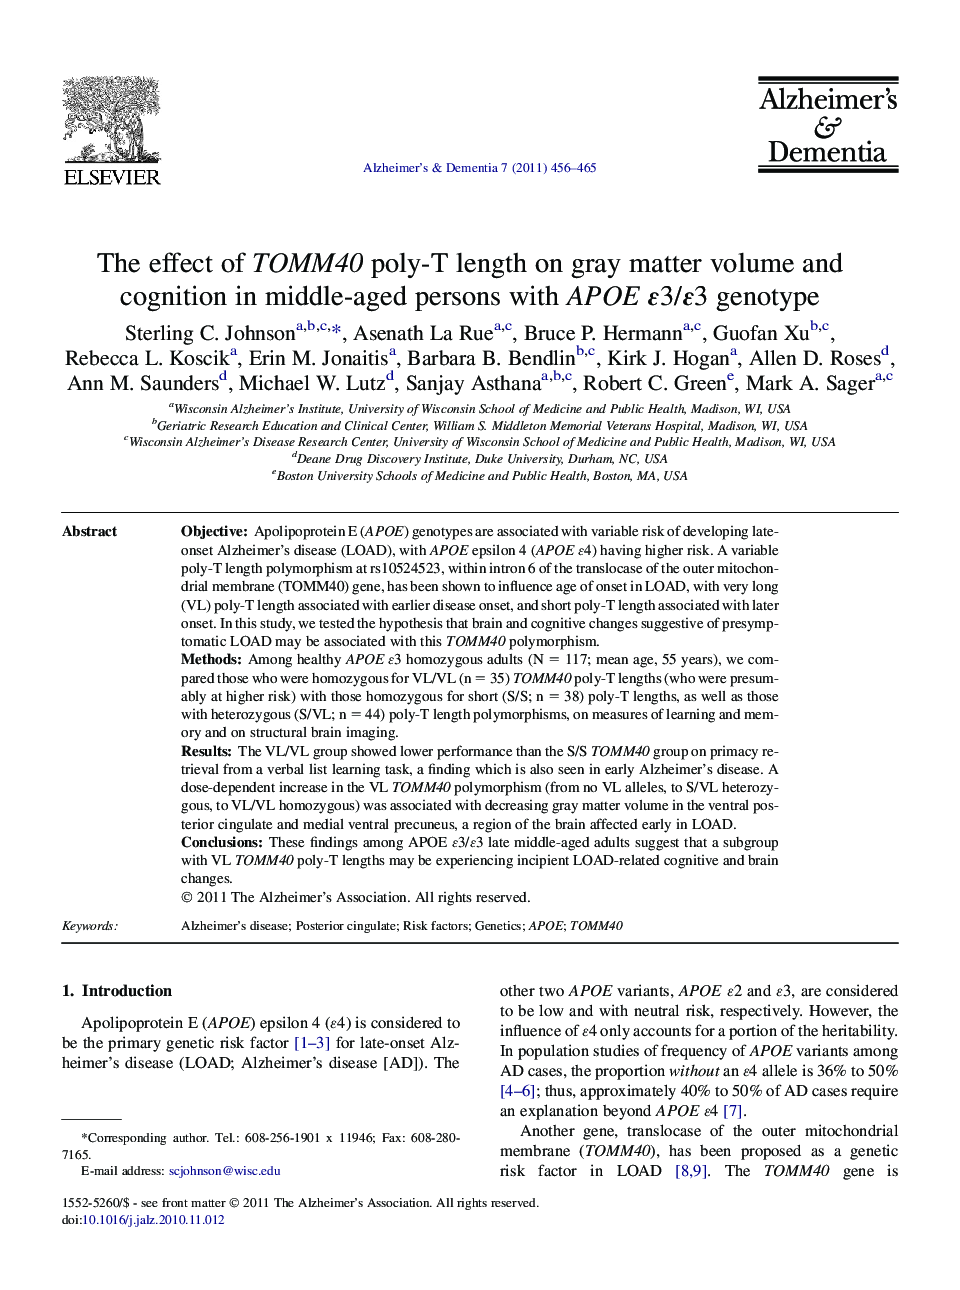 Featured ArticleThe effect of TOMM40 poly-T length on gray matter volume and cognition in middle-aged persons with APOE É3/É3 genotype